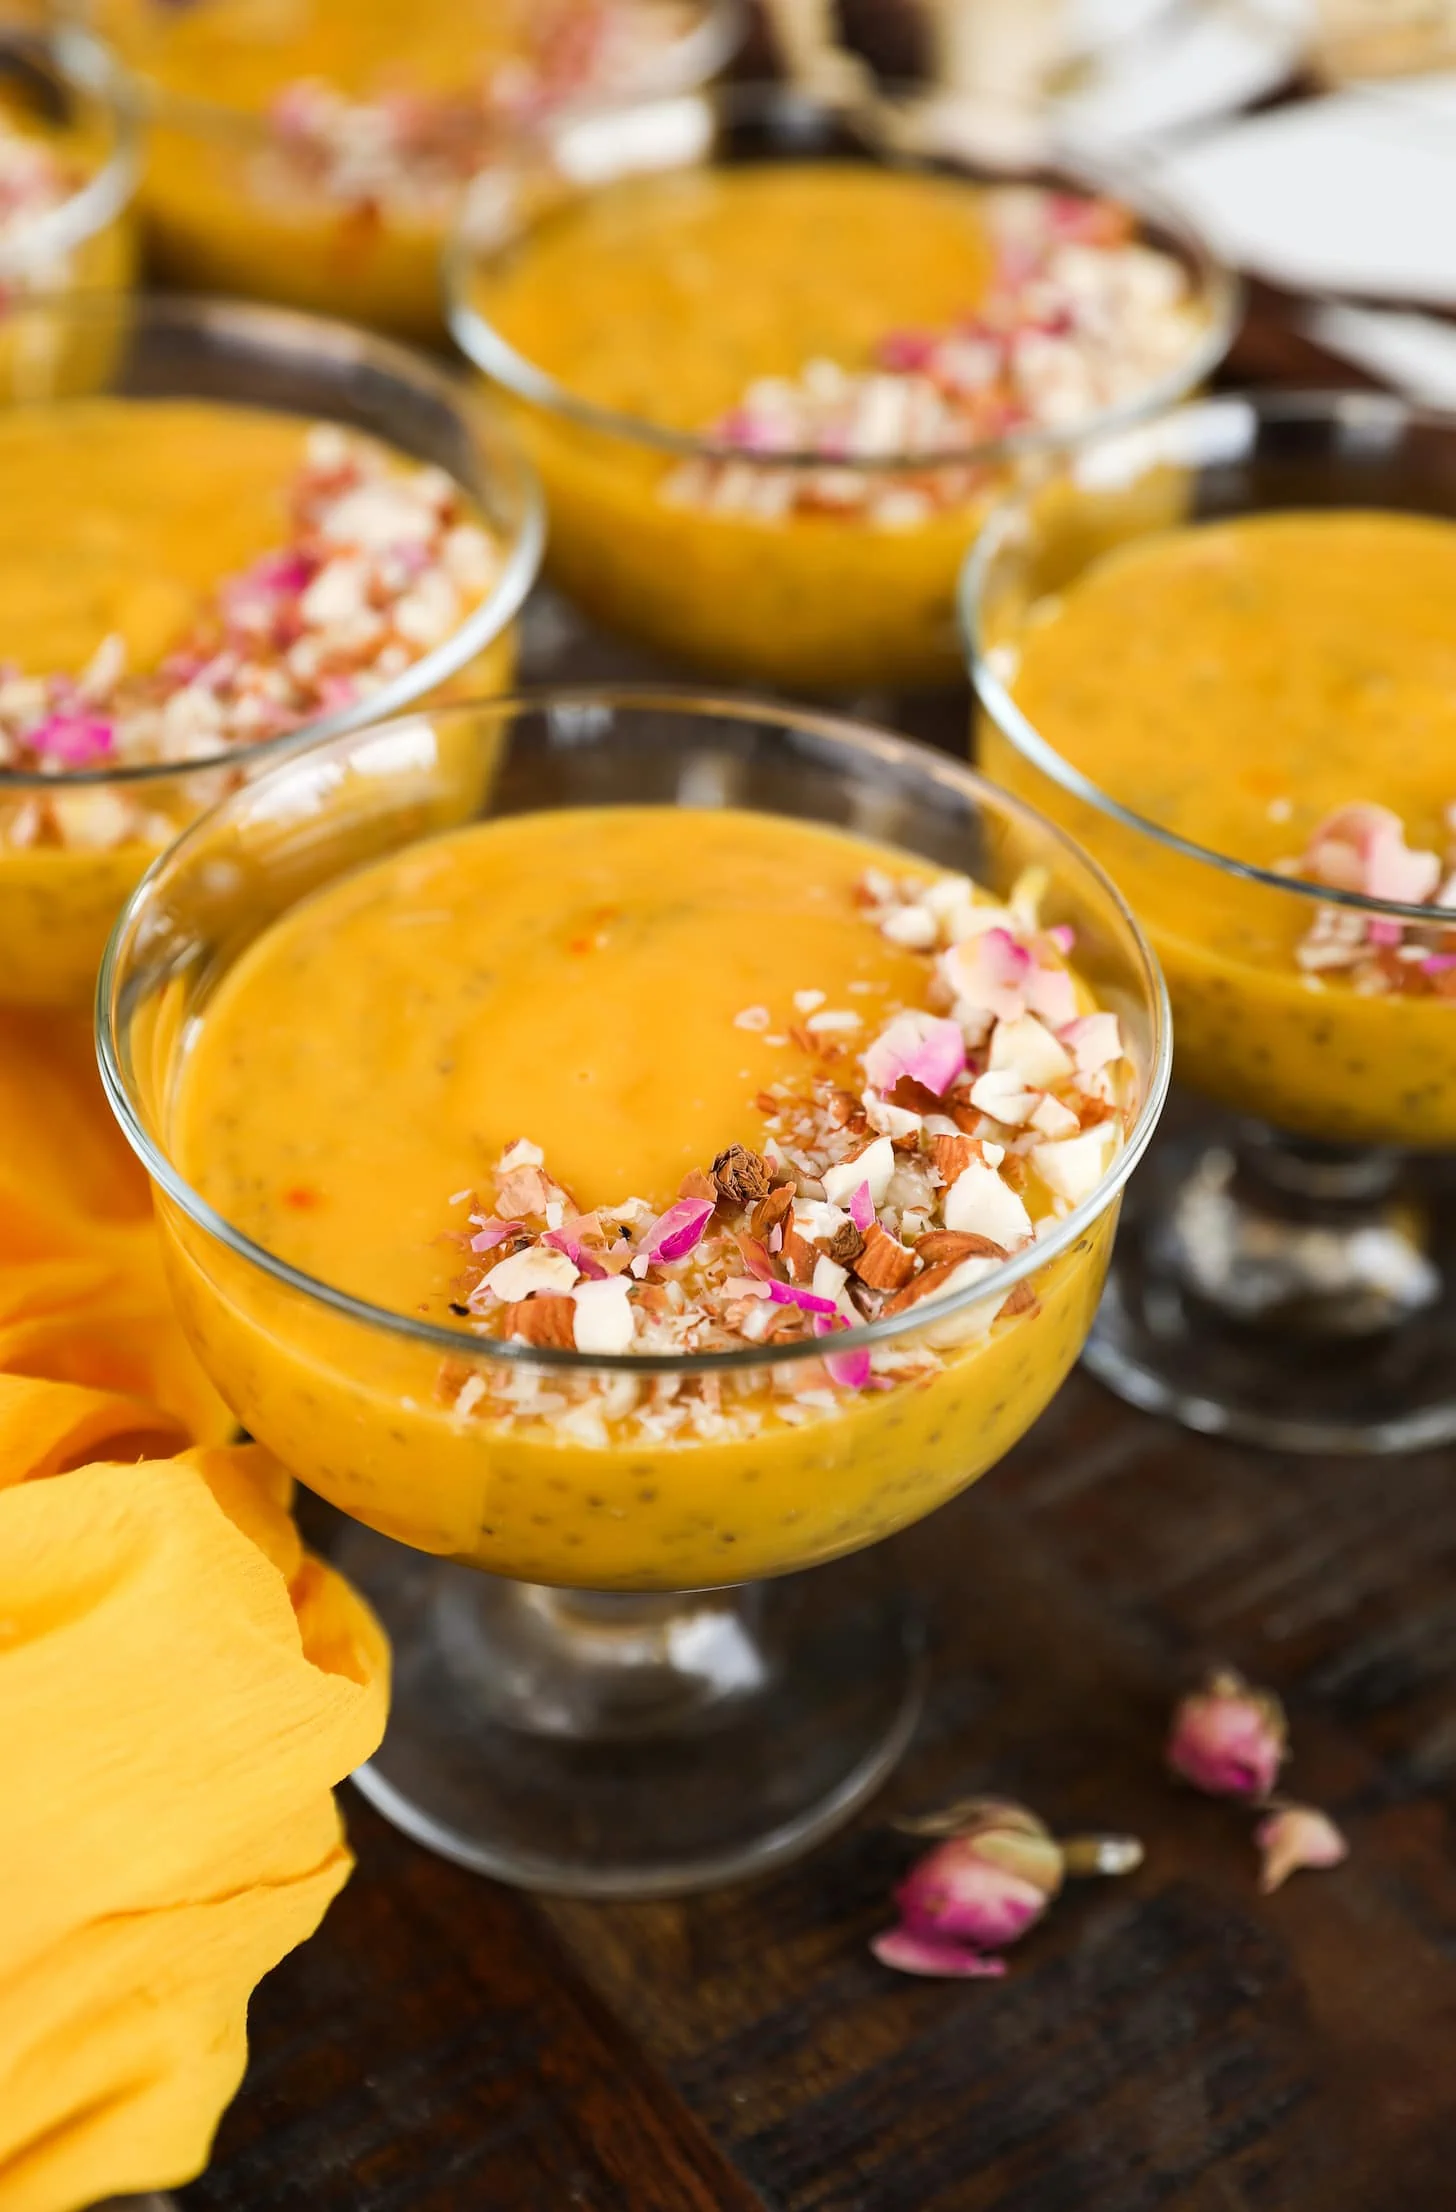 angle shot of a serving bowls with a thick orange coloured pudding garnished with nuts and dried roses.